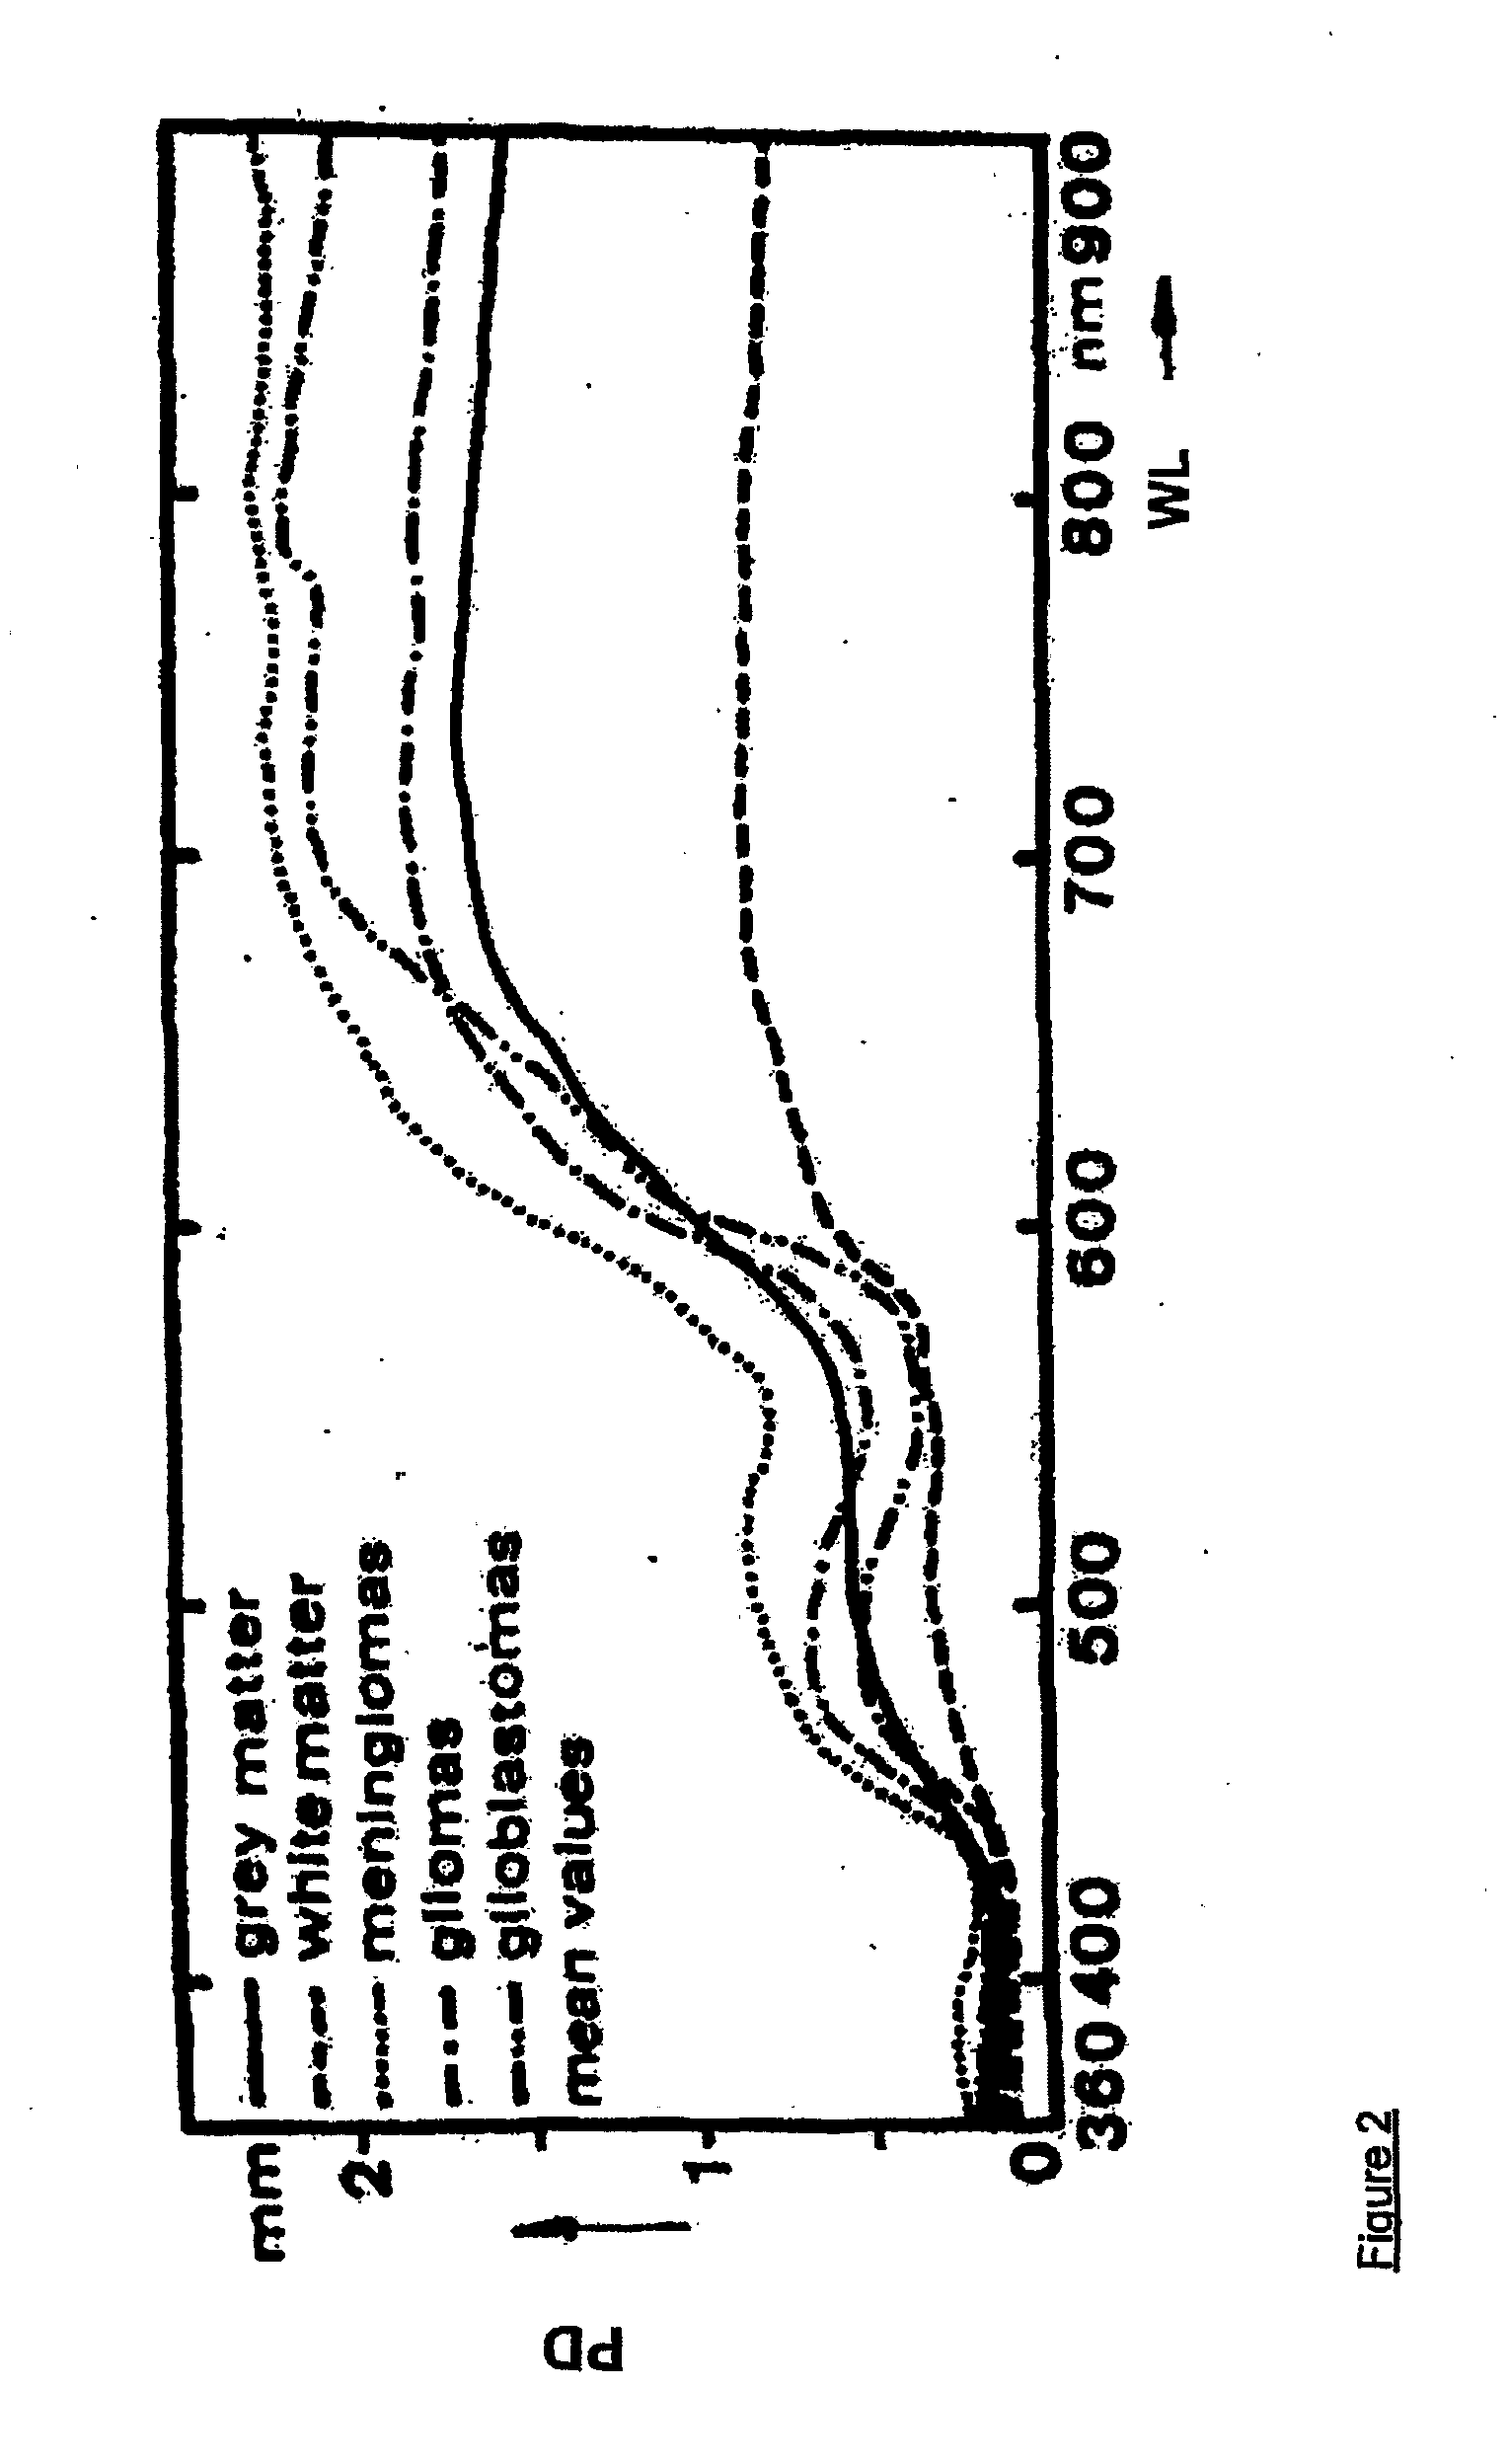 Apparatus and Method for Monitoring Tissue Vitality Parameters